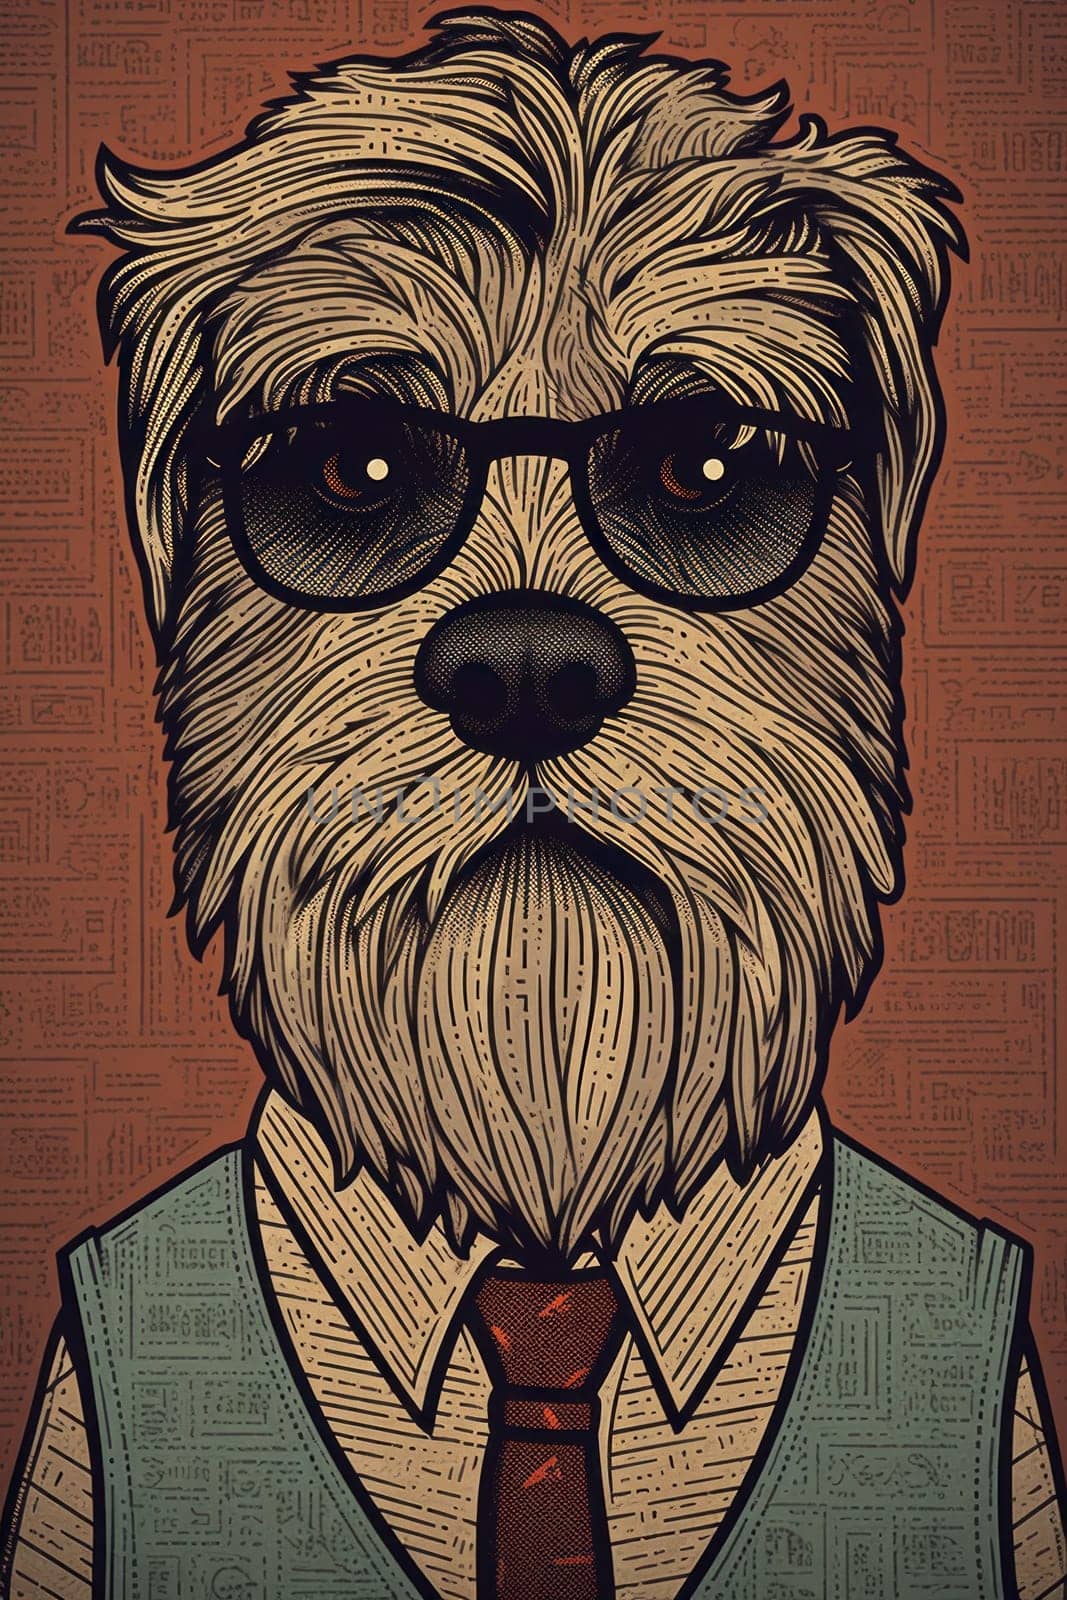 A drawing of a dog wearing a vest and tie, AI by starush